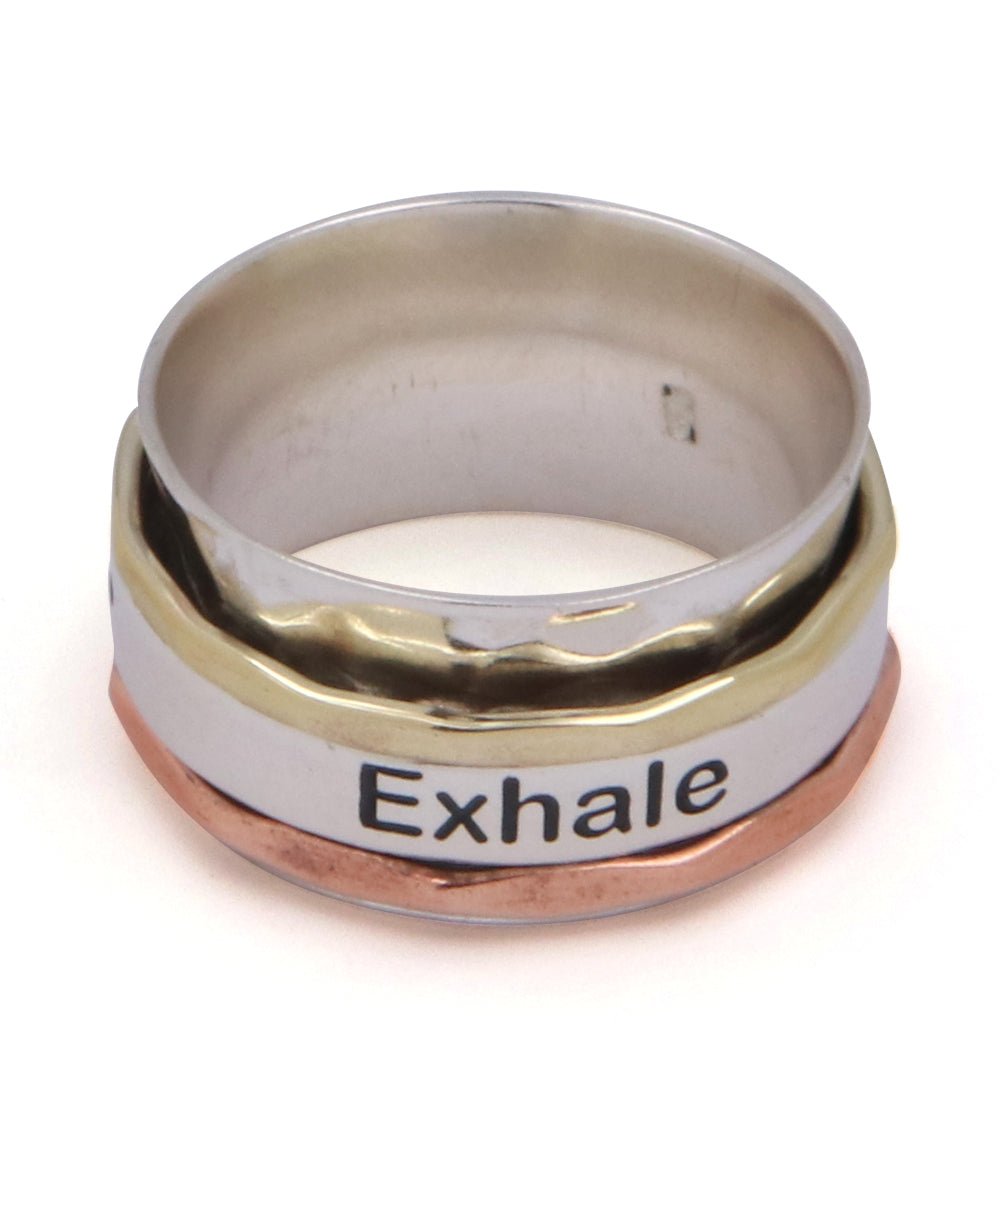 Inhale, Exhale Spinning Meditation Ring - Rings Size 6